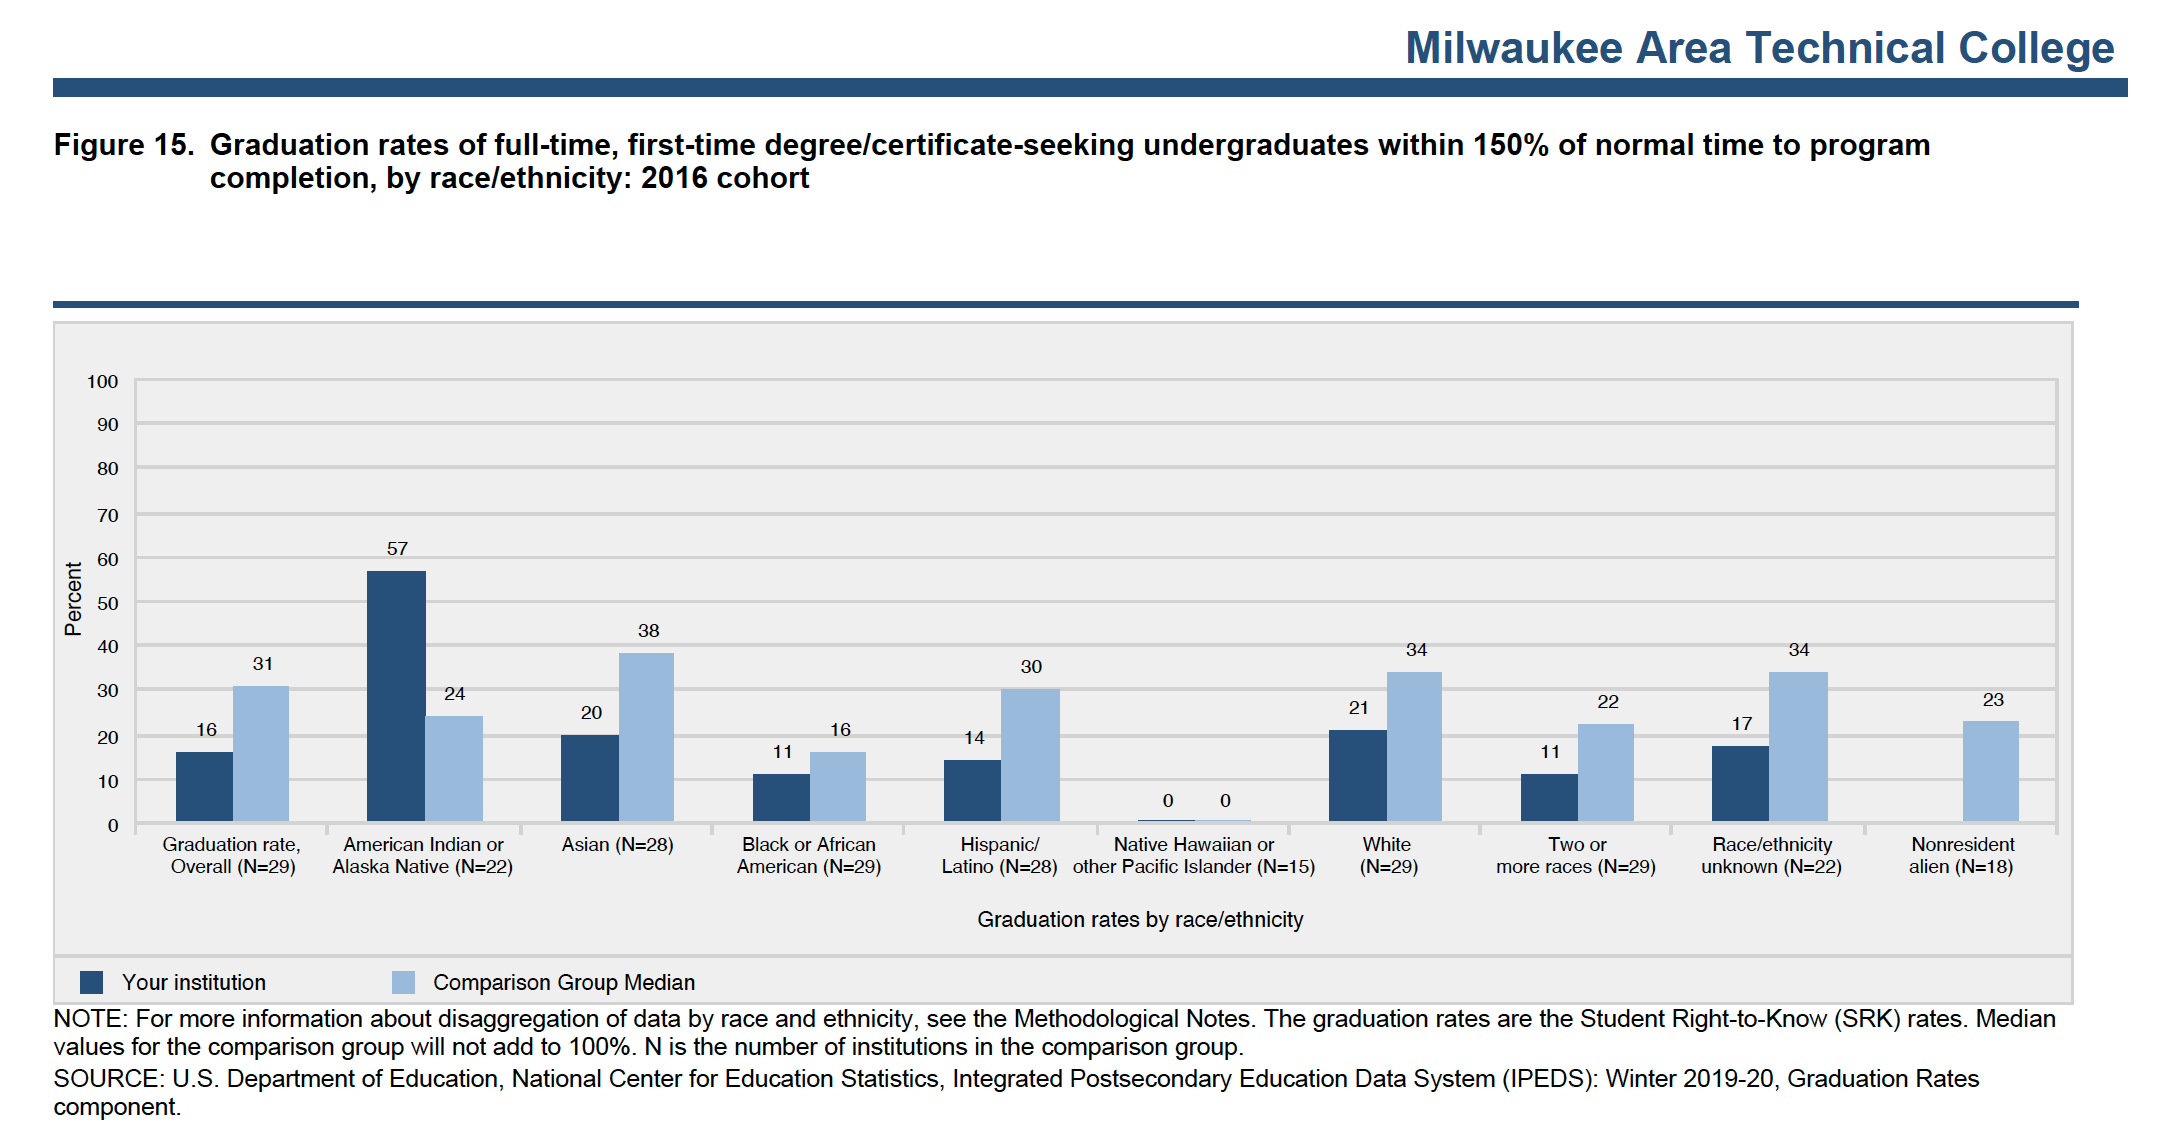 This analysis of Milwaukee Area Technical College's graduation rate shows fewer of its students finish their programs within 150% of the normal completion time compared to peer institutions nationwide. Source: Integrated Postsecondary Education Data System.